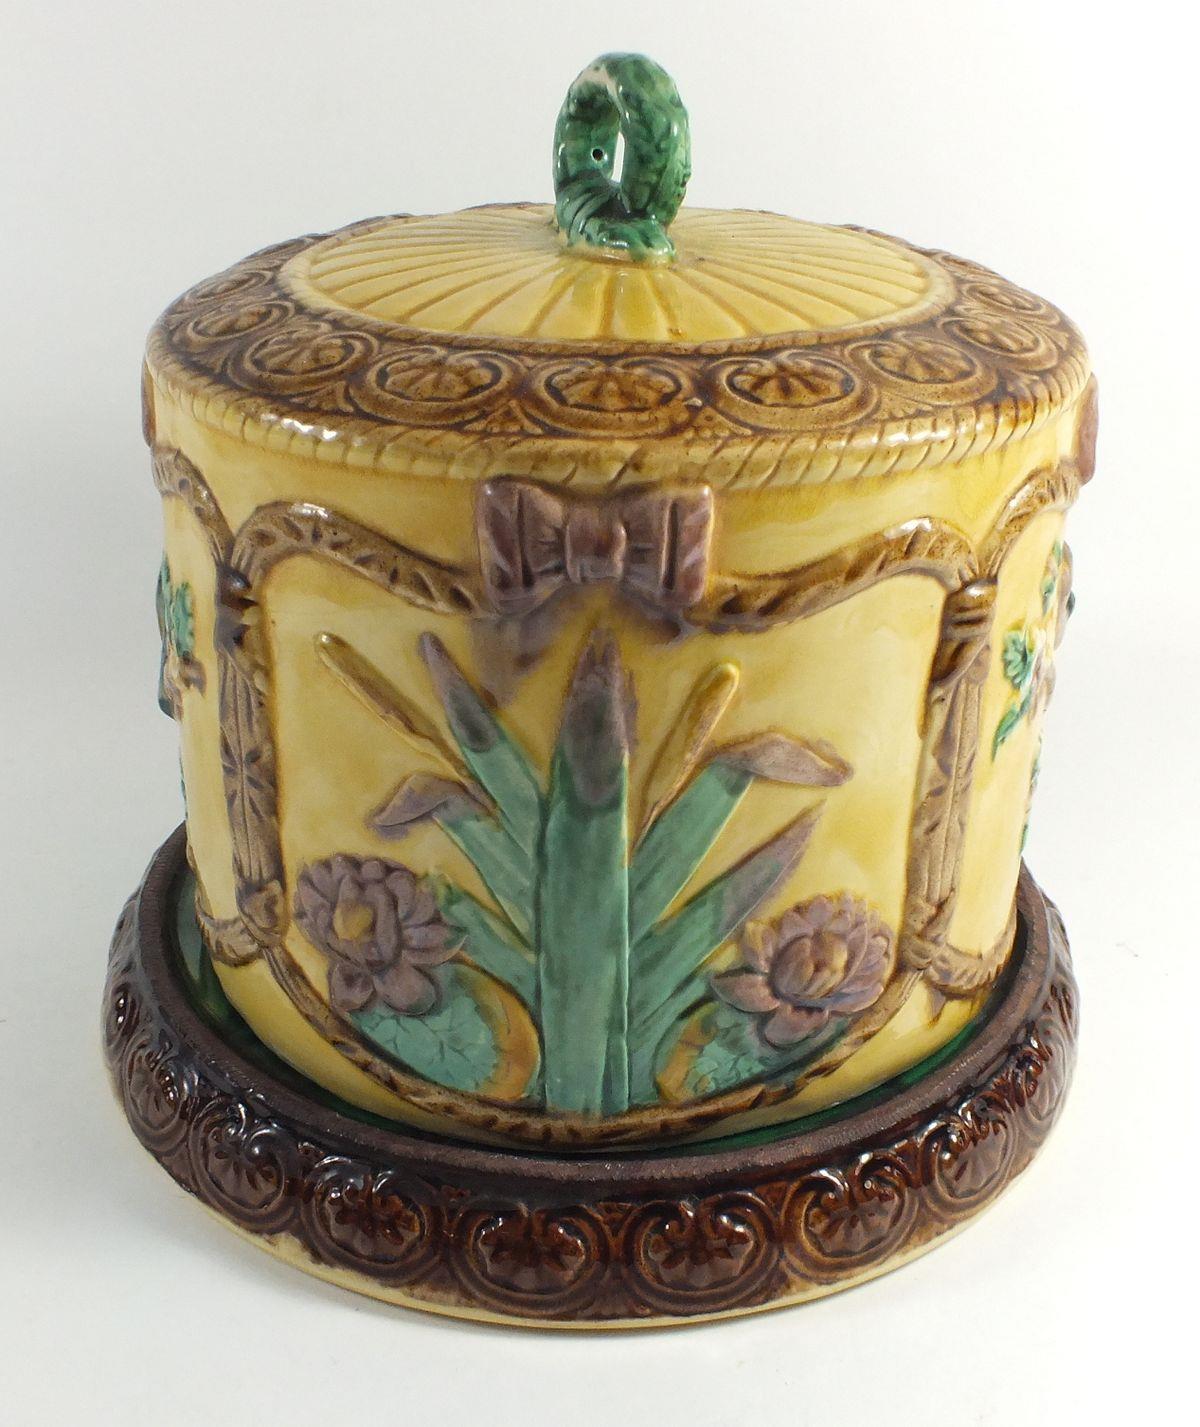 Two Victorian Majolica cheese domes, one marked Adderley with fern design and the other with flowers - Image 3 of 3